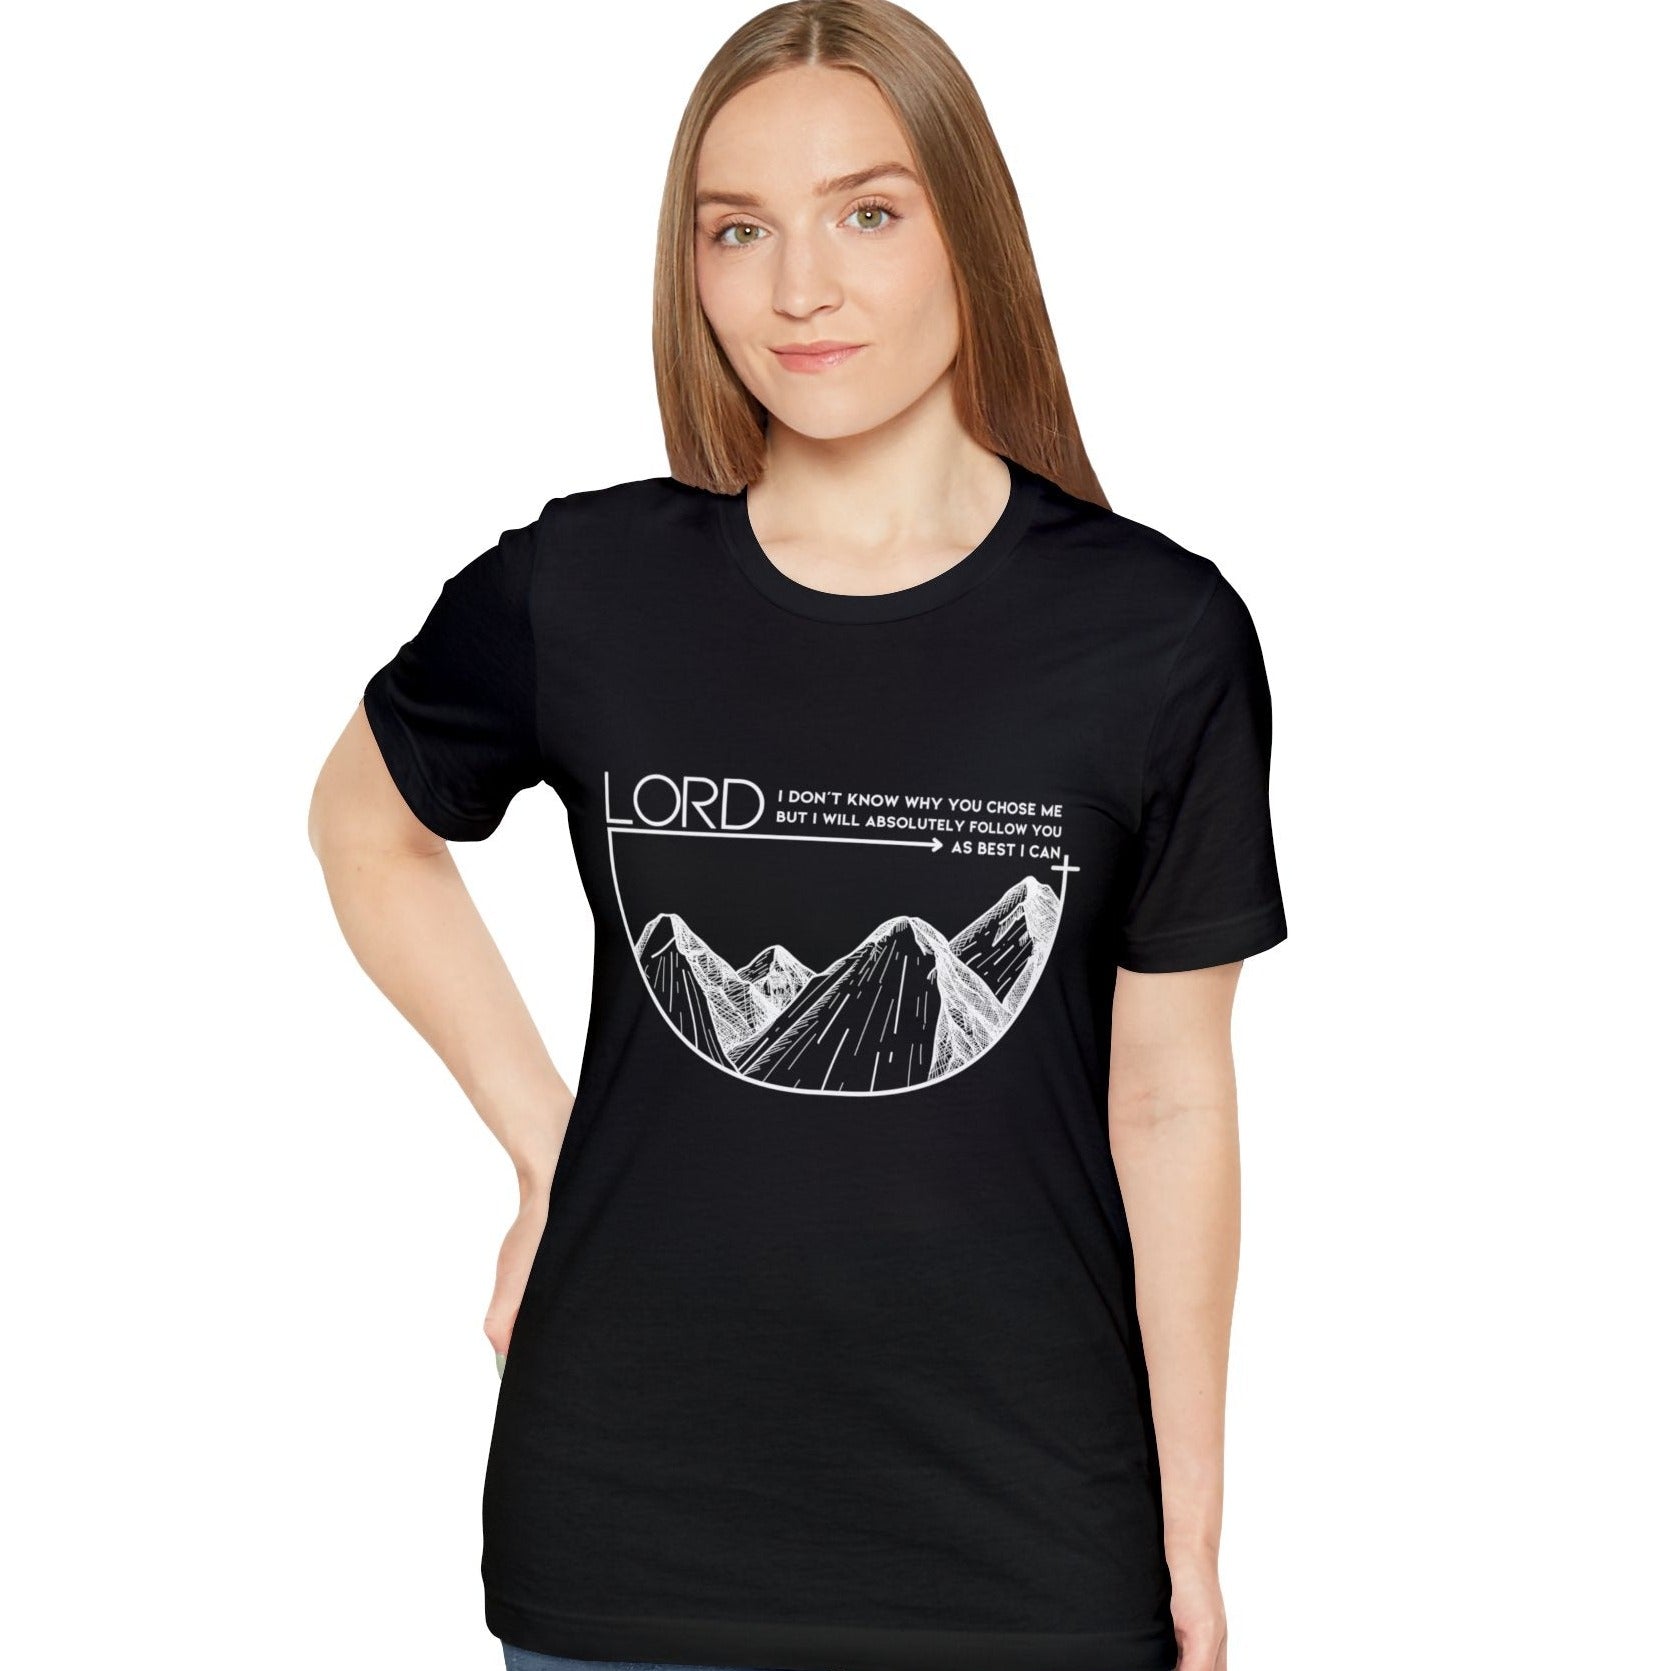 Follow the Lord, Express Delivery, Christian T-shirt for Men and Women black